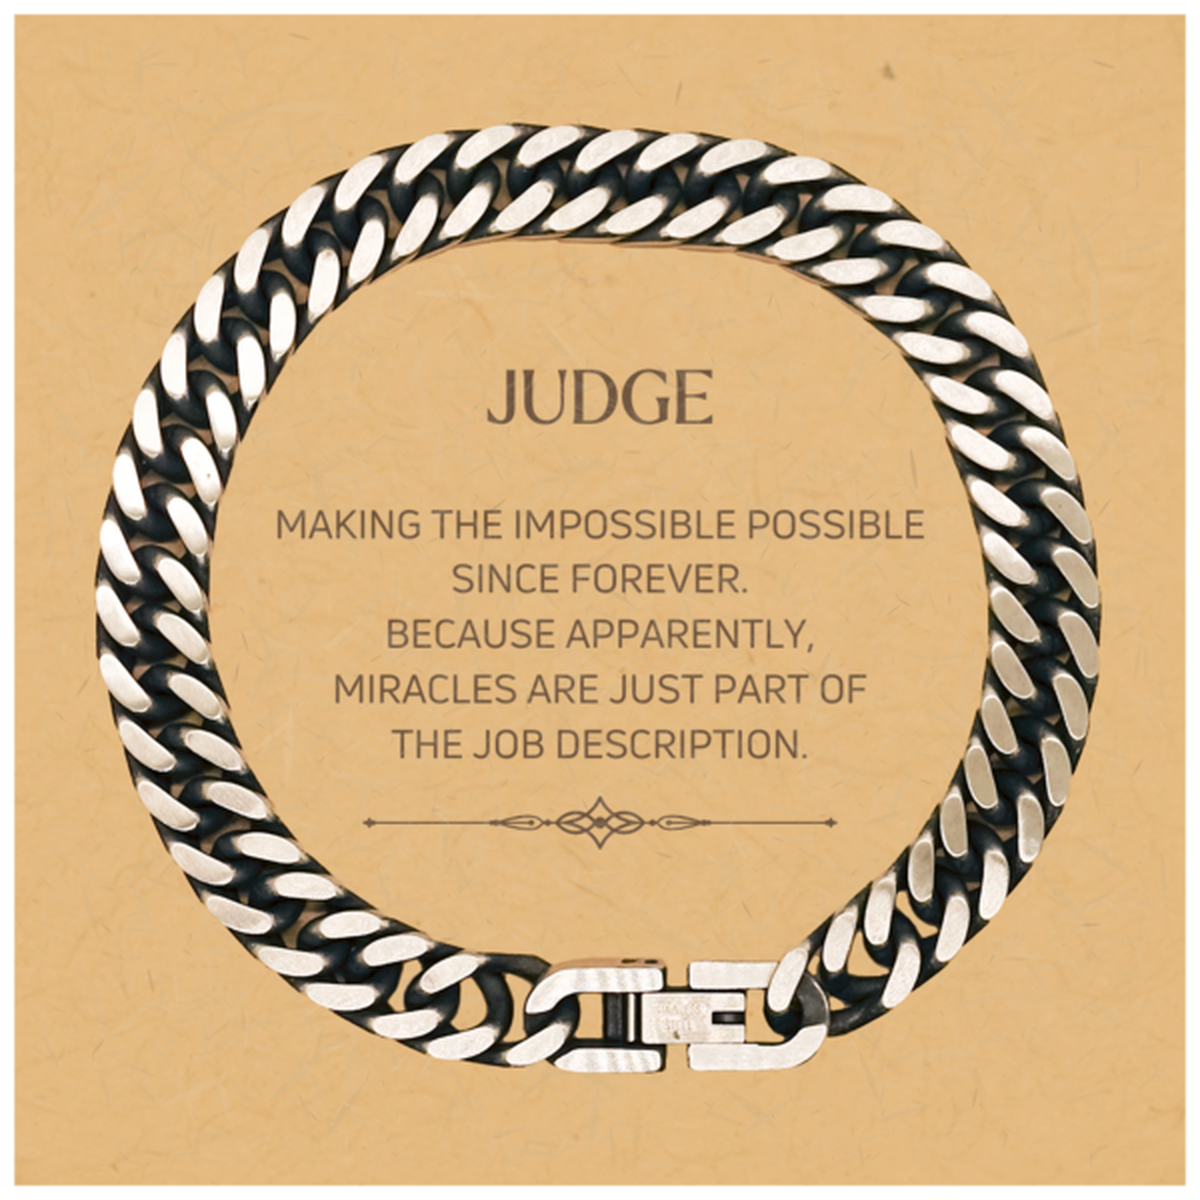 Funny Judge Gifts, Miracles are just part of the job description, Inspirational Birthday Christmas Cuban Link Chain Bracelet For Judge, Men, Women, Coworkers, Friends, Boss